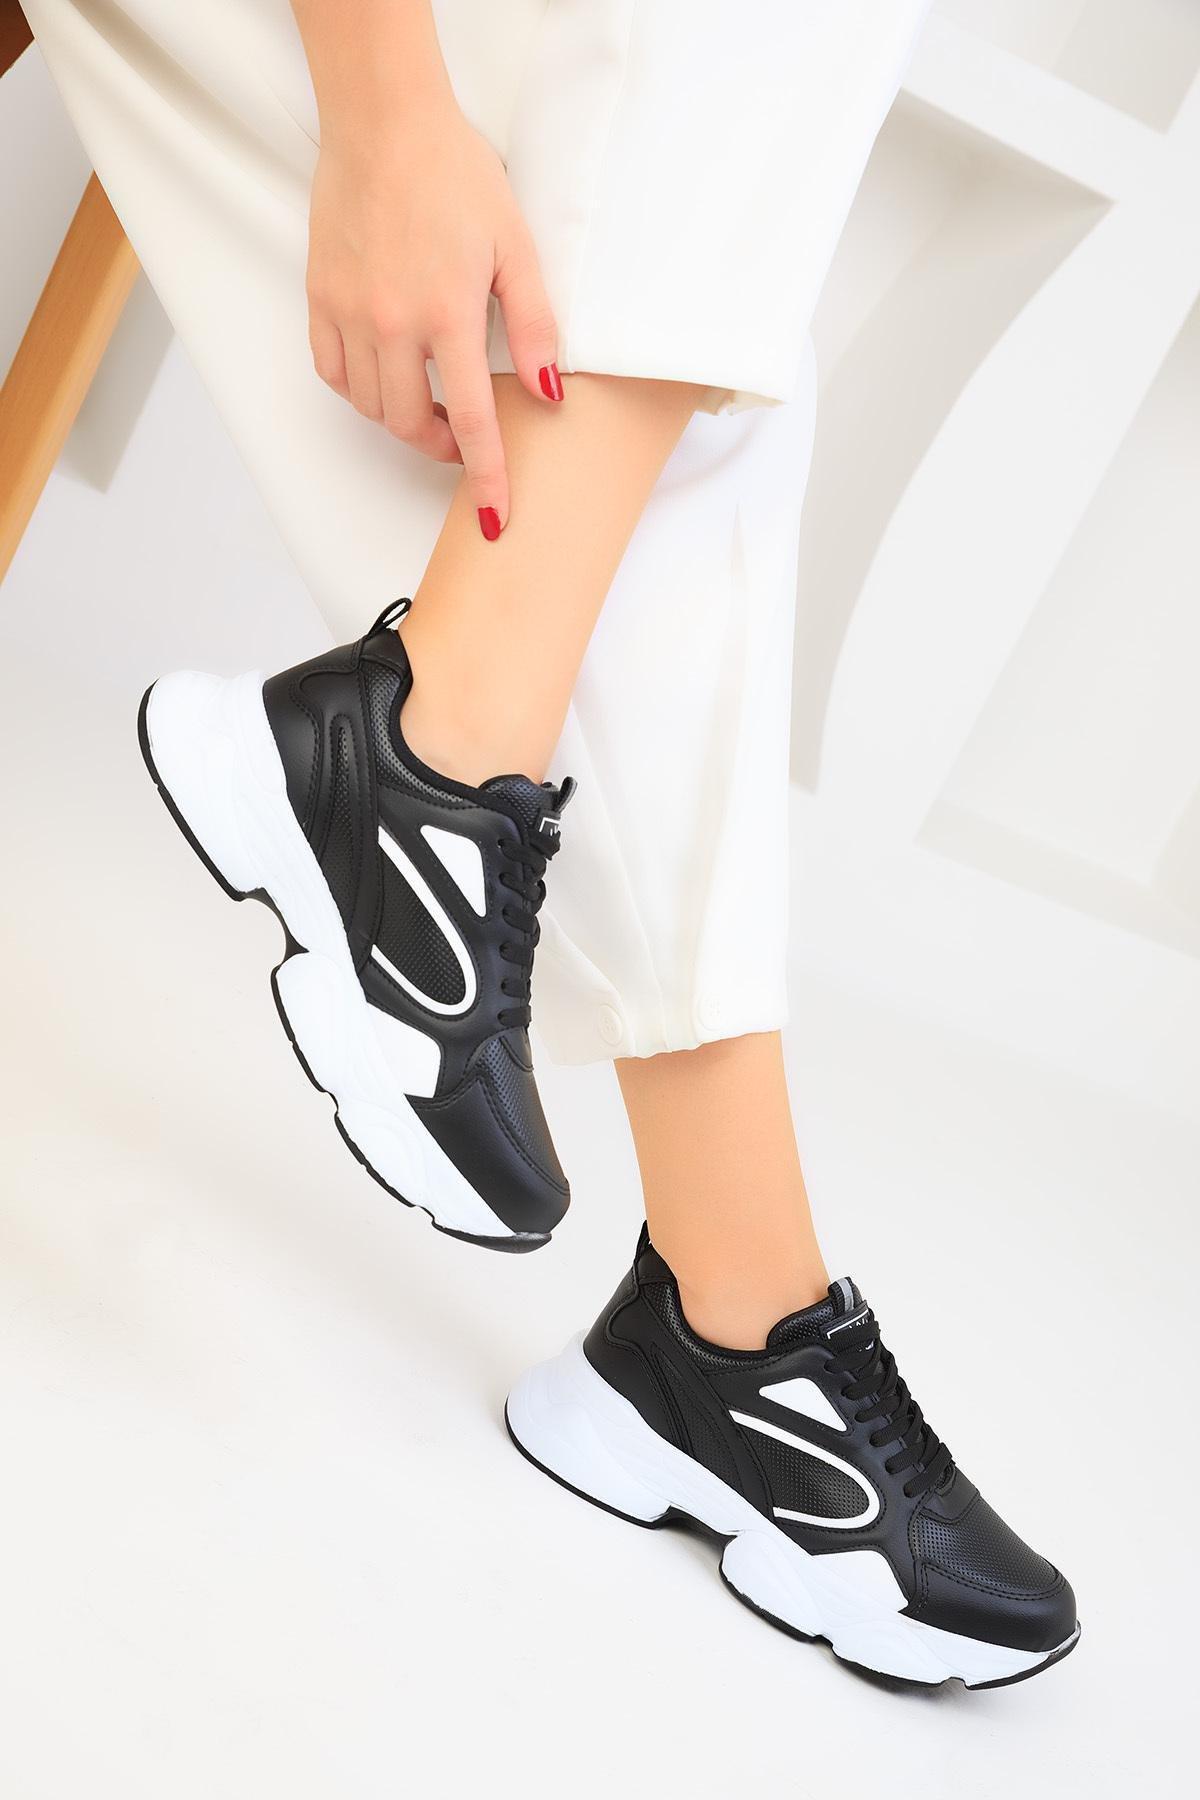 SOHO - Black Lace-Up Sneakers